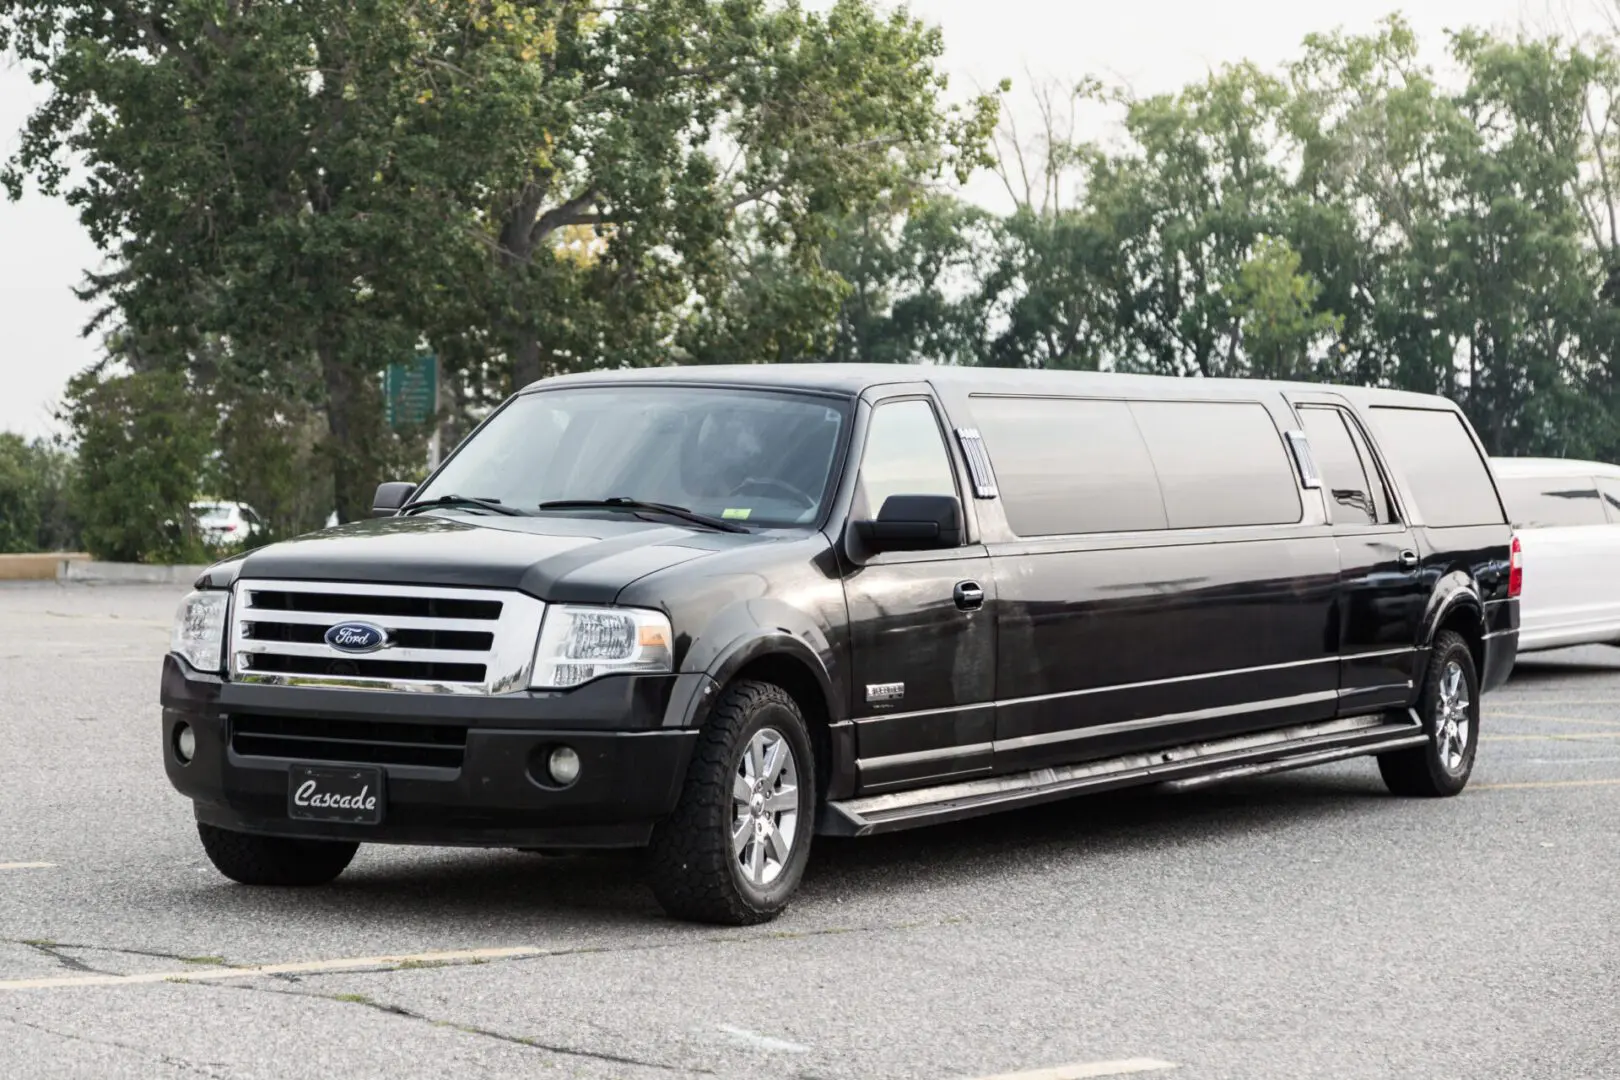 Image shows a black Ford Expedition stretch limousine parked on a road with green tress in the background.